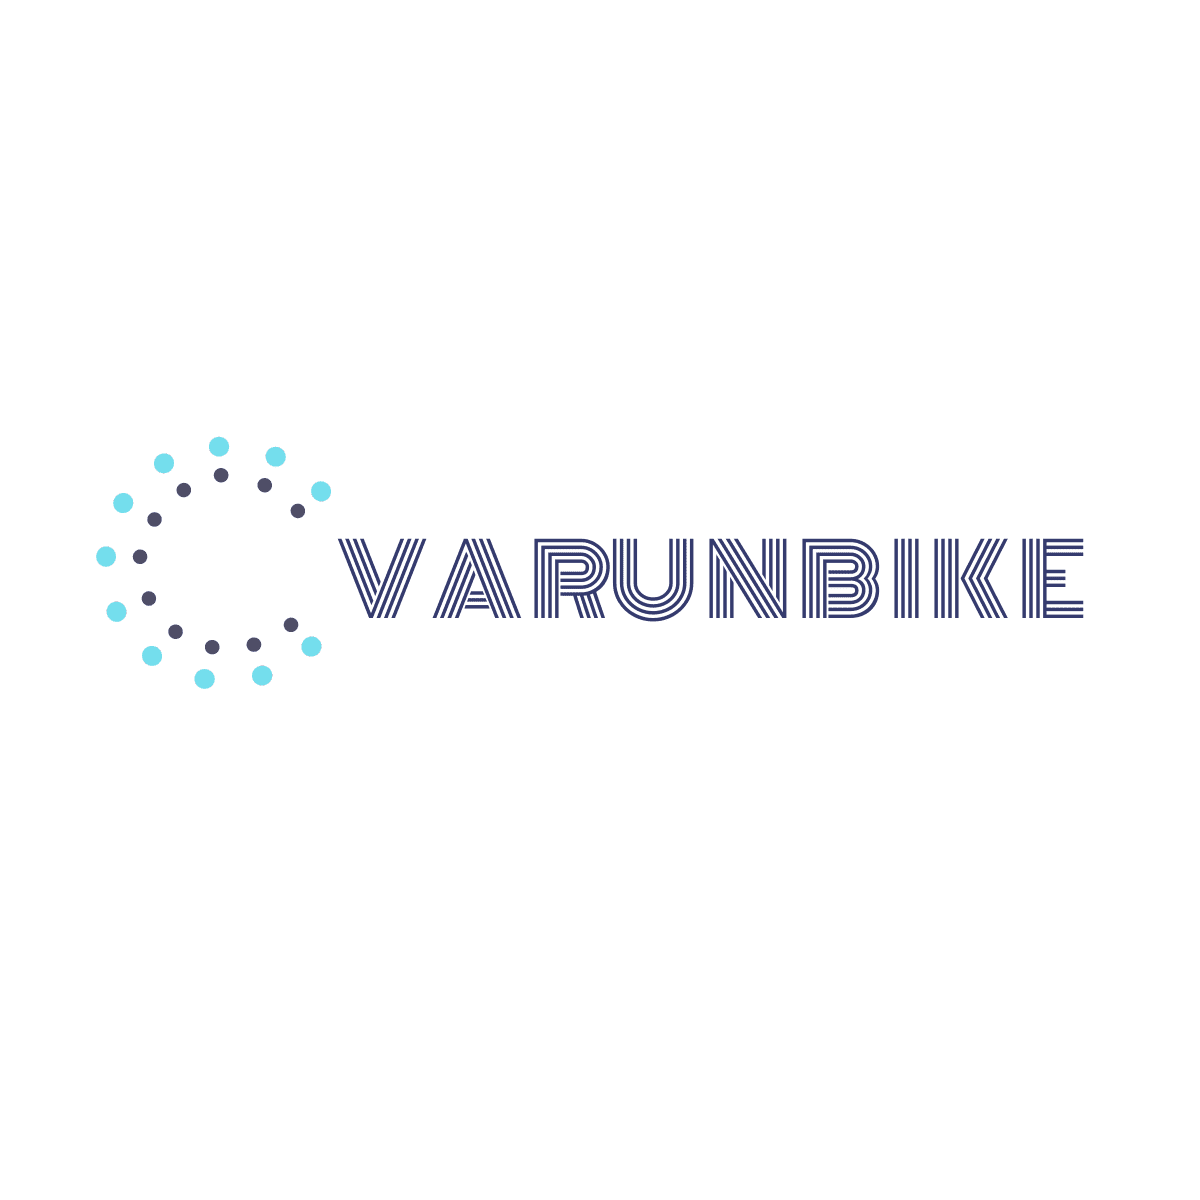 When you're hesitating about whether to purchase the Varun Electric Bike, I encourage you to make the brave decision of choosing Varun Electric Bike.